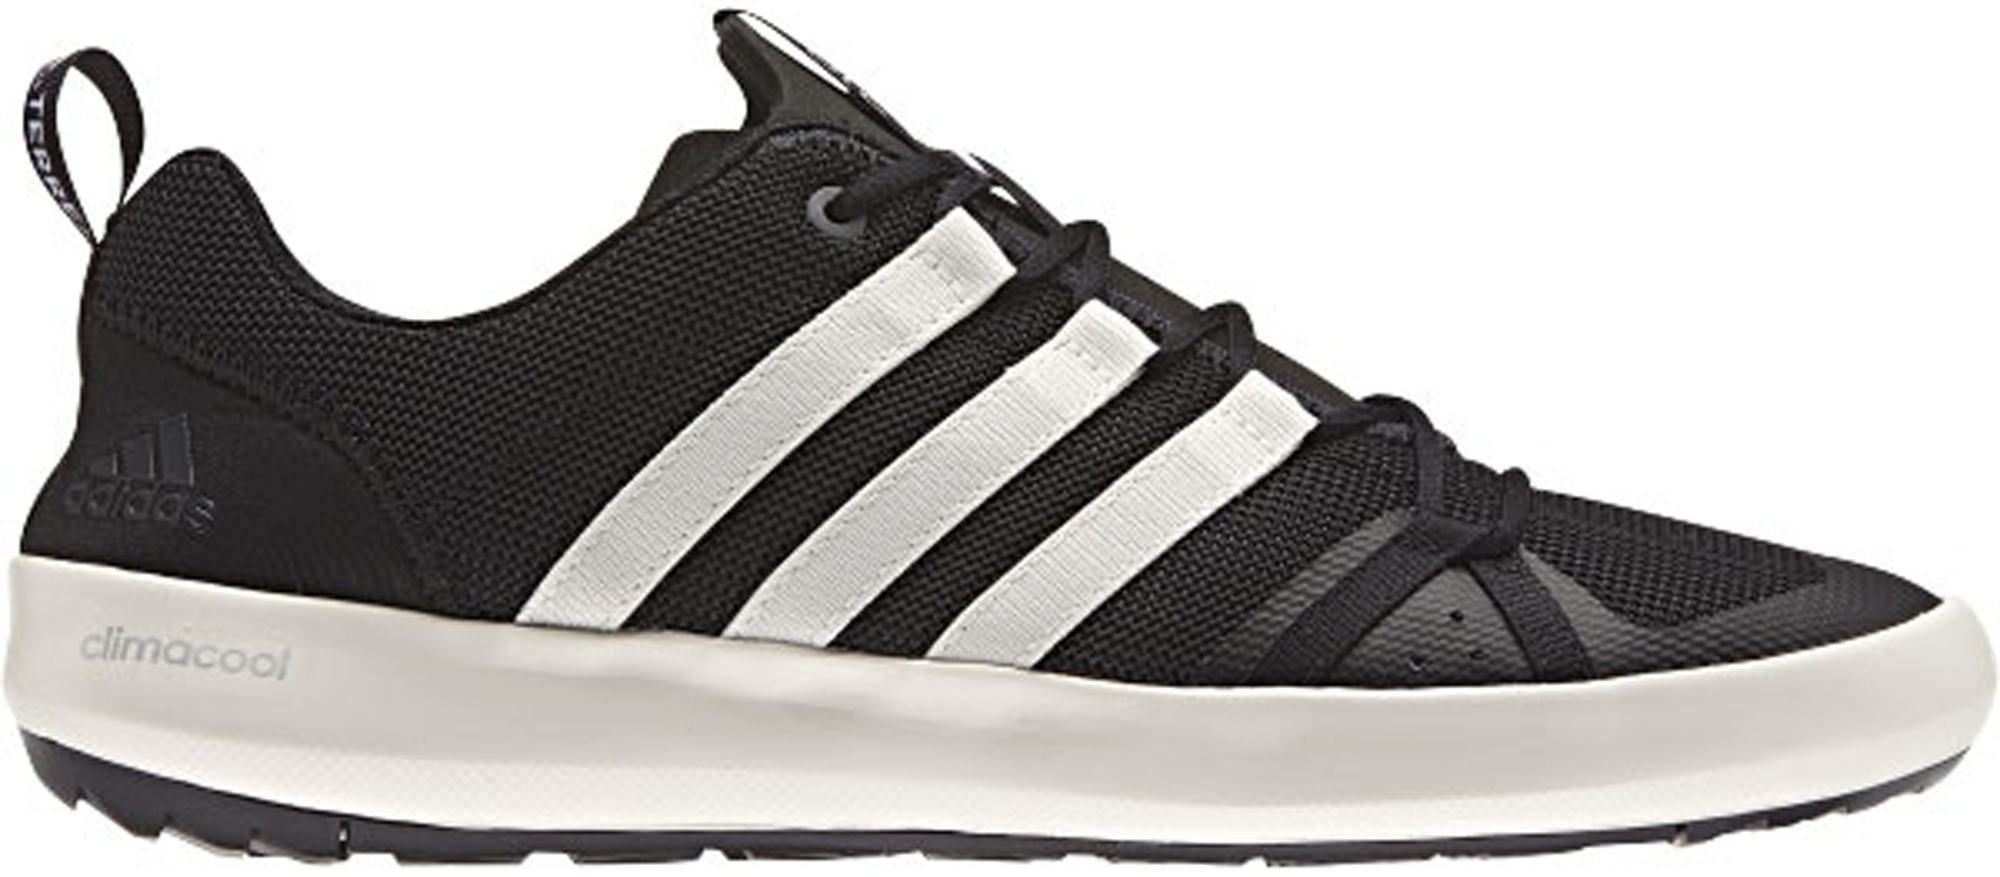 adidas terrex climacool shoes